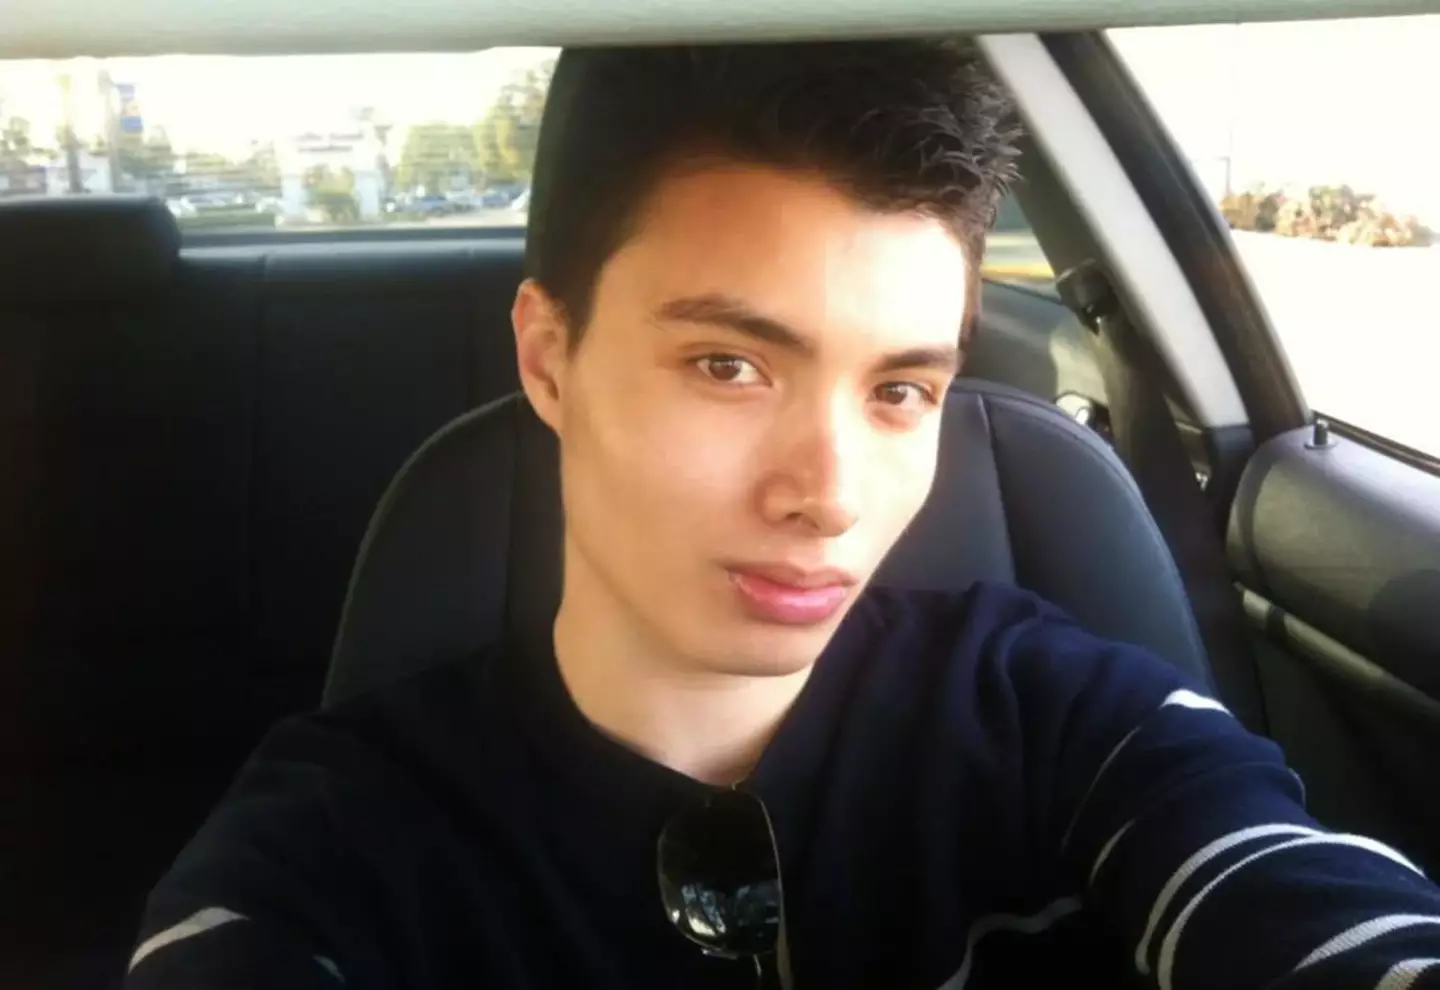 Elliot Rodger shared his hatred of women online before going on a killing spree in 2014.